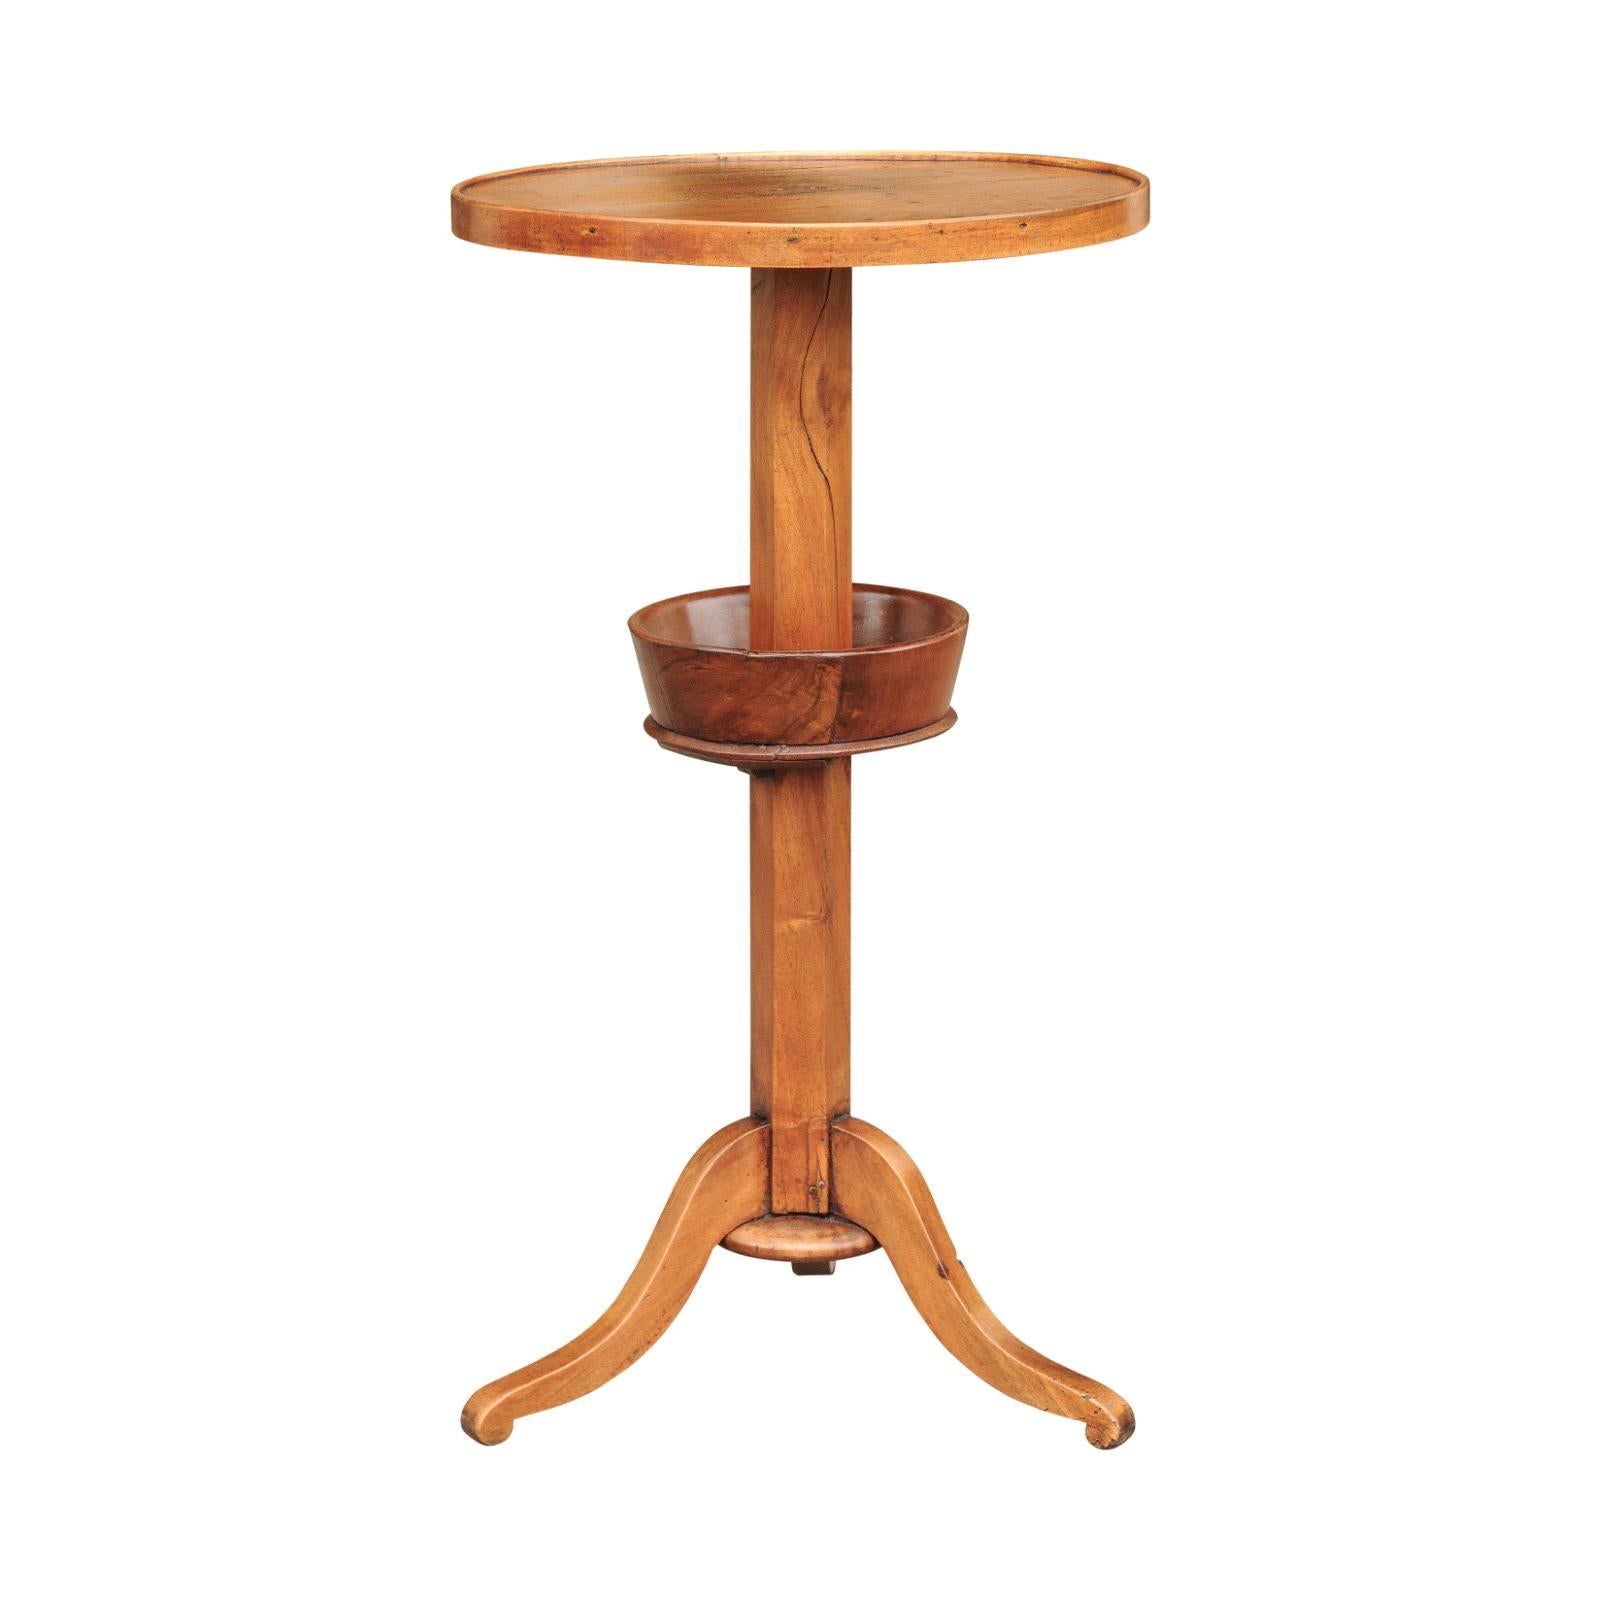 French Walnut Guéridon Side Table with Circular Top and Tripod Base, circa 1875 For Sale